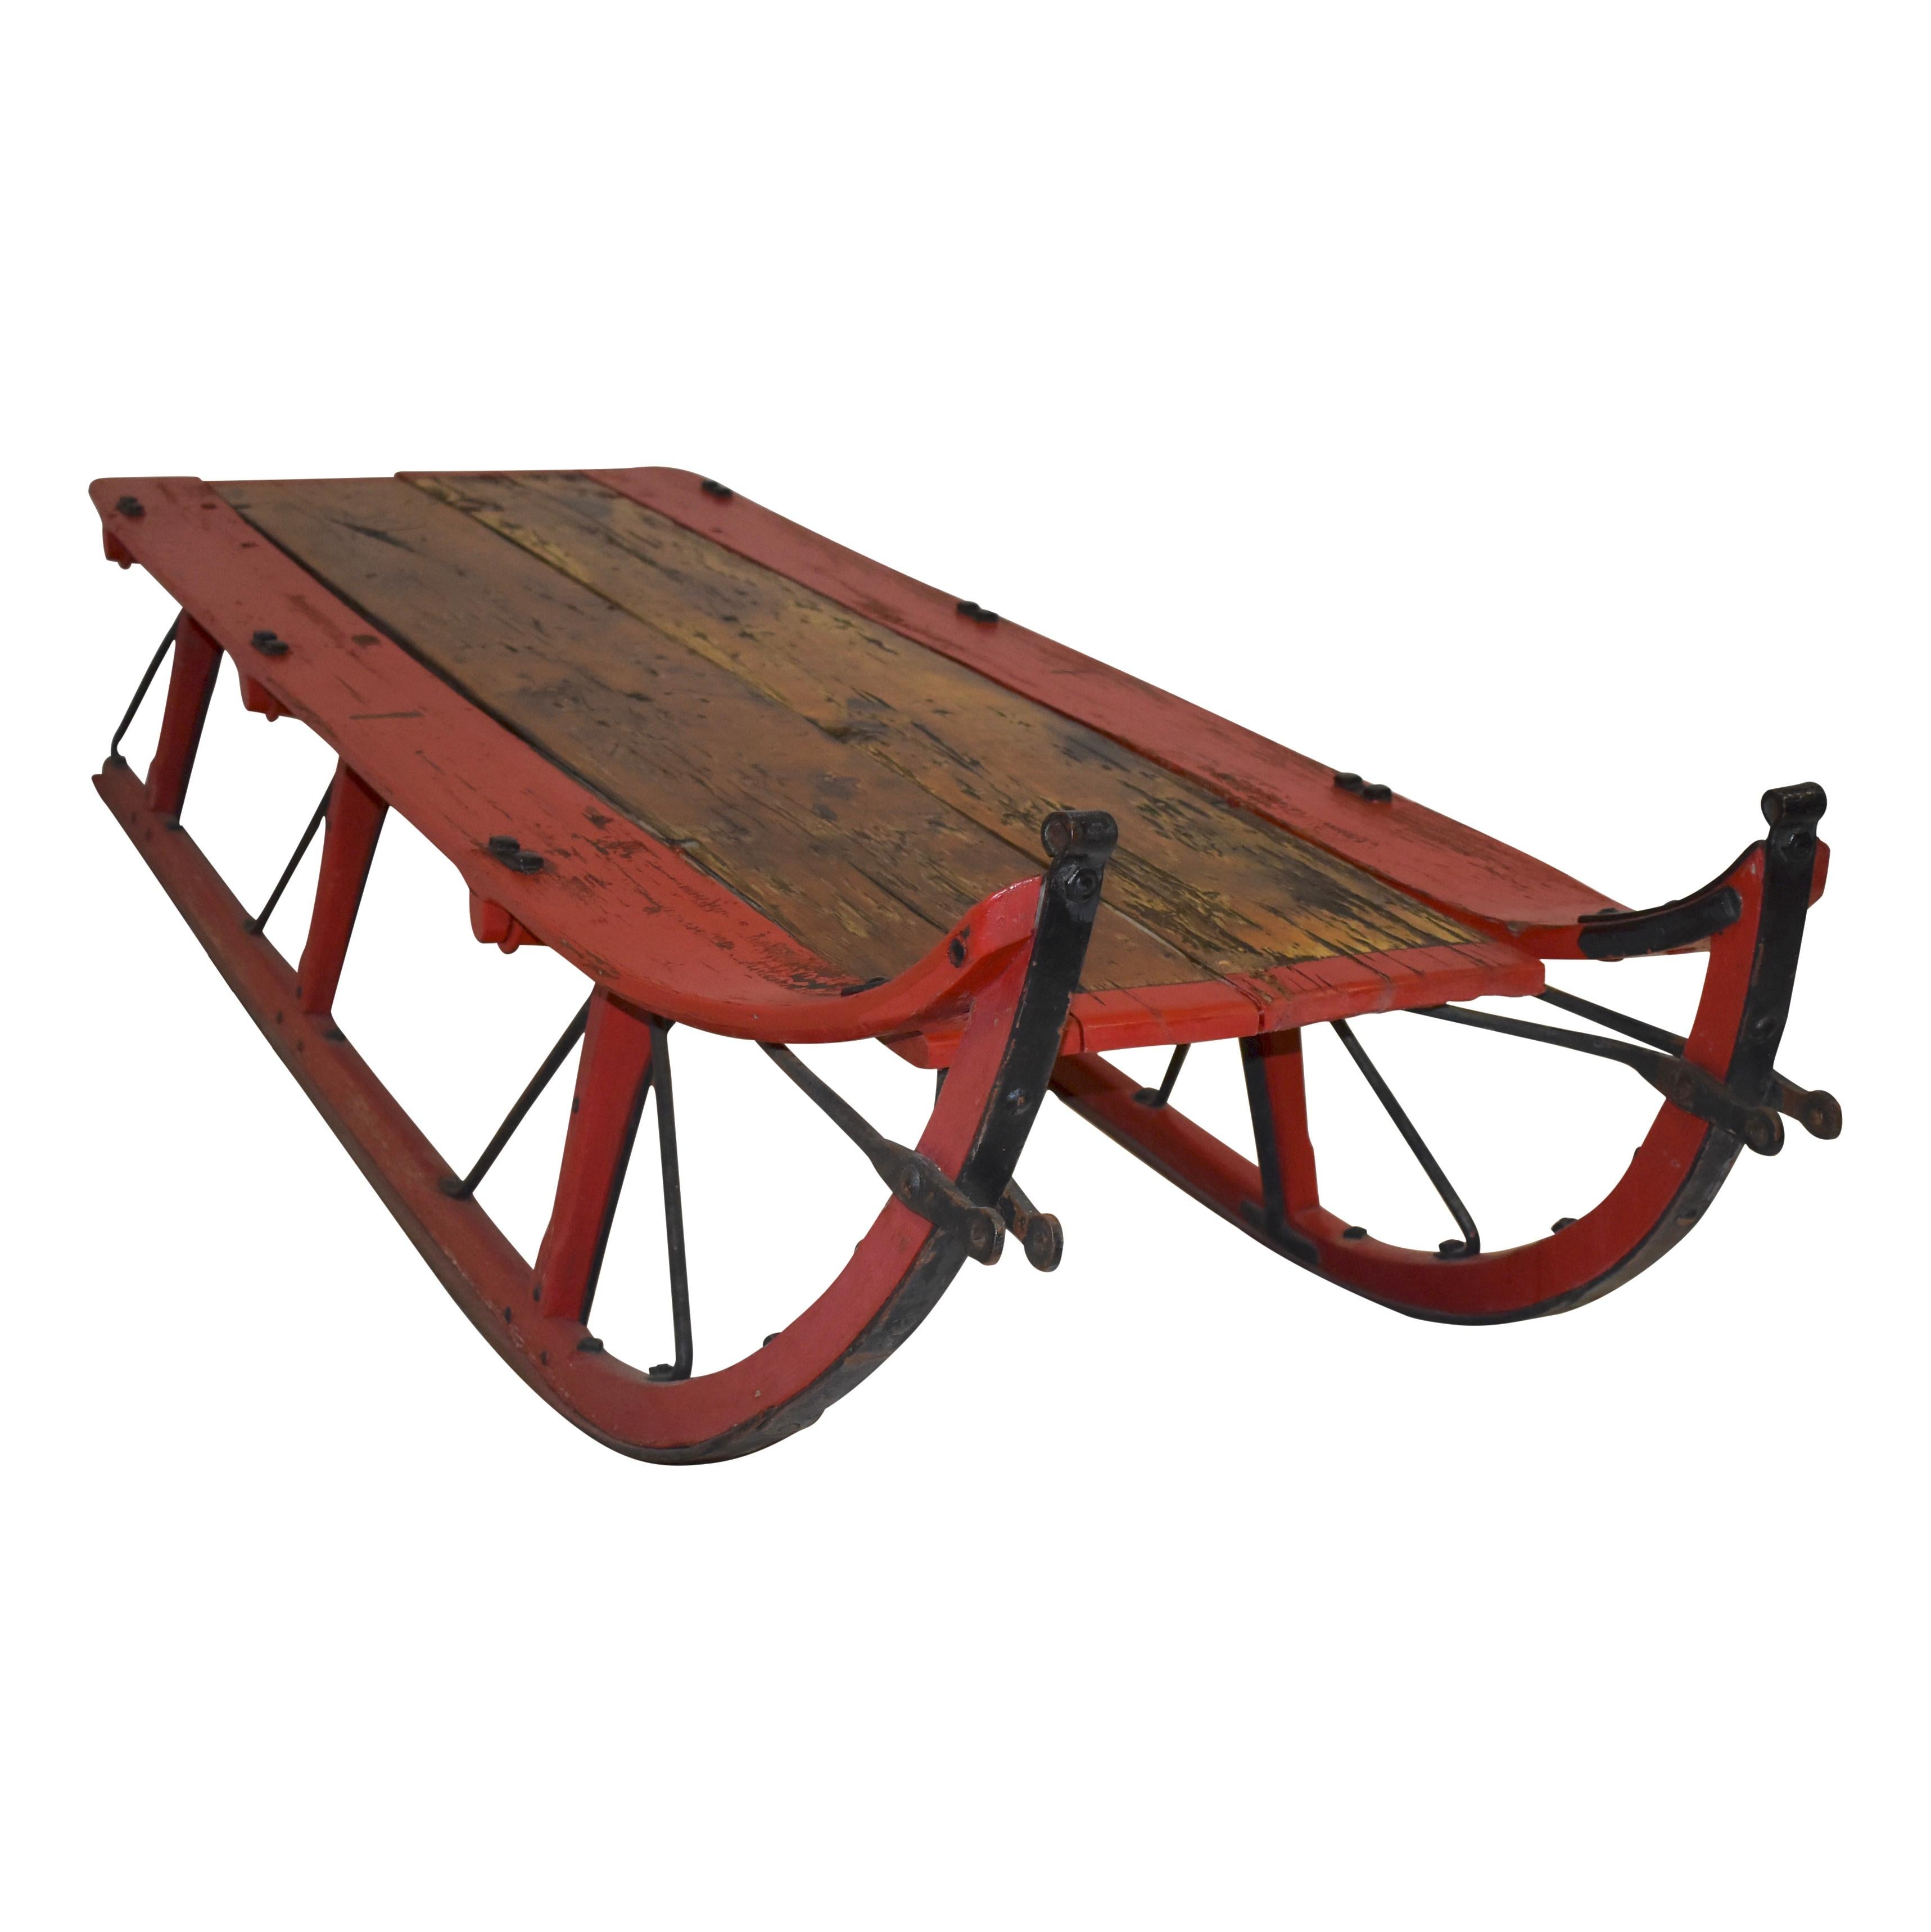 Crafted from antique sleigh runners and reclaimed wood, this rustic coffee table features long, wooden runners with metal runner glides from the turn of the century, giving the table a substantial footprint. Distressed red paint adds to its rustic